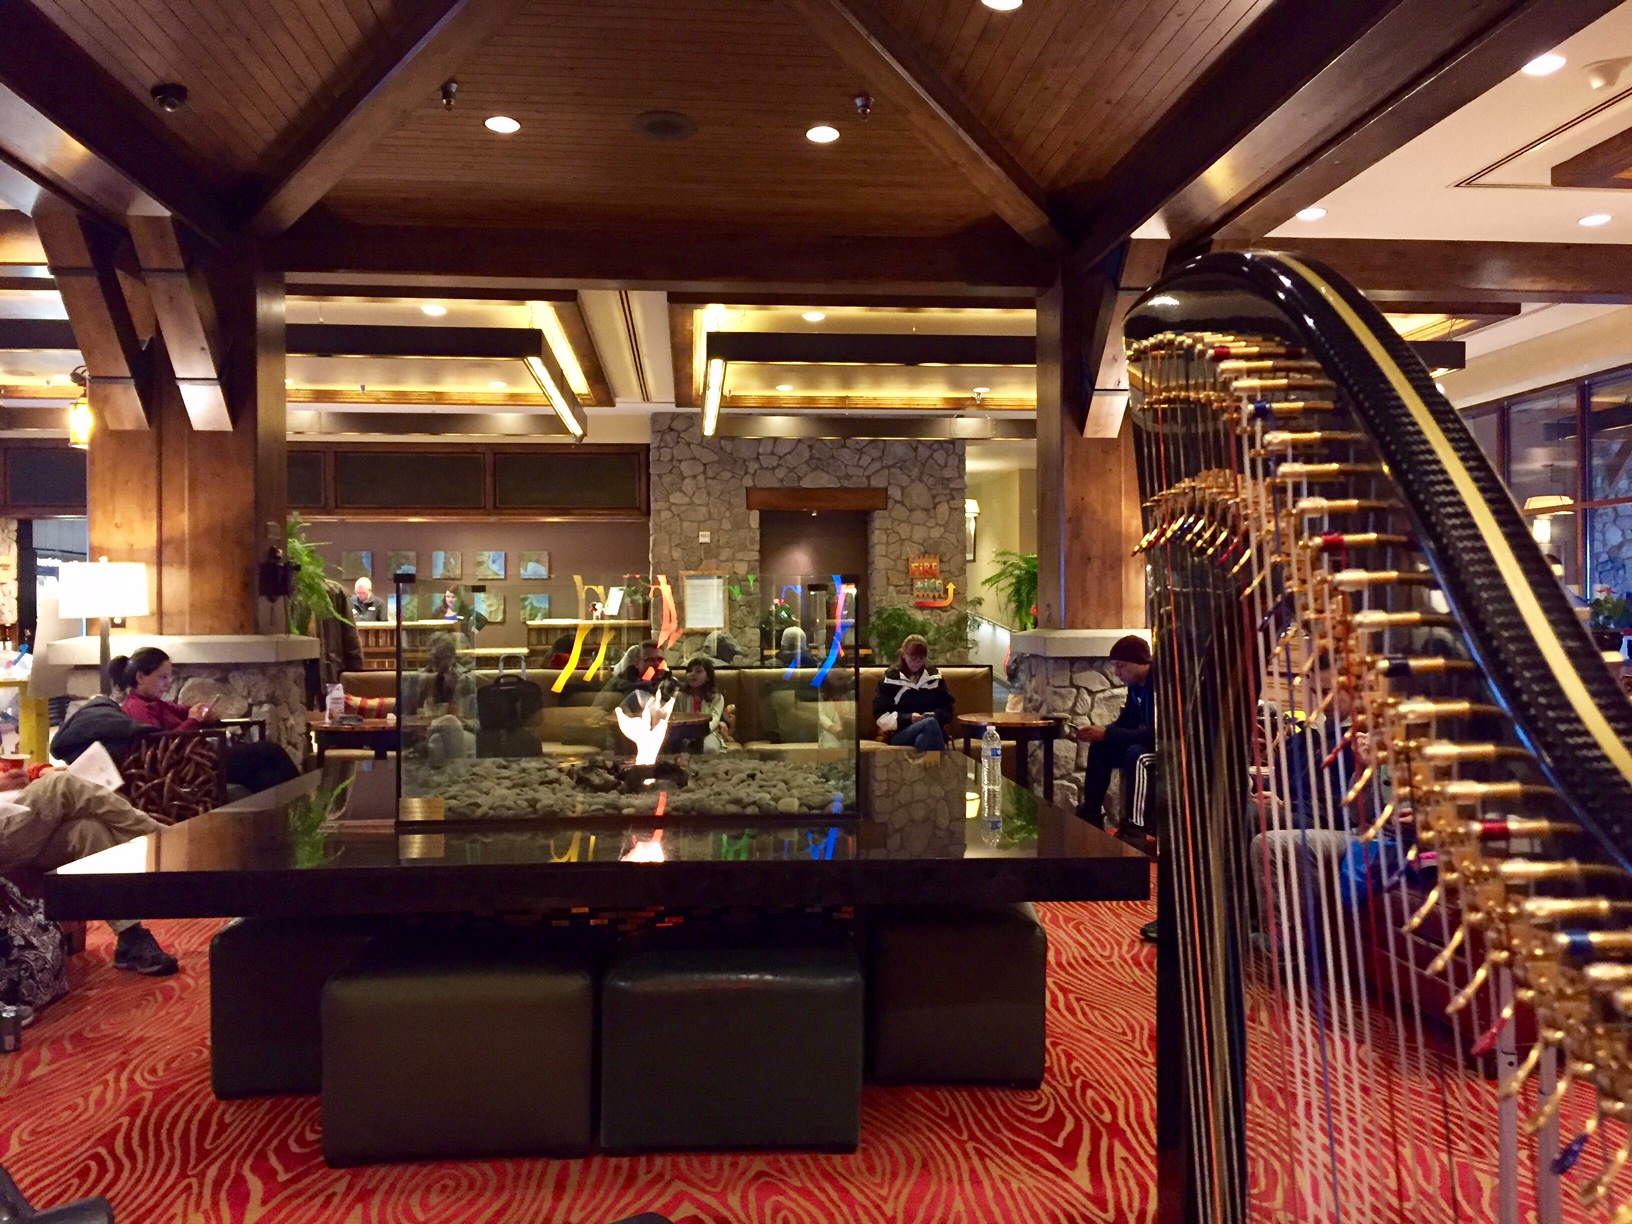 Harpist Anne Roos Performs in Which Hotel Lobby?